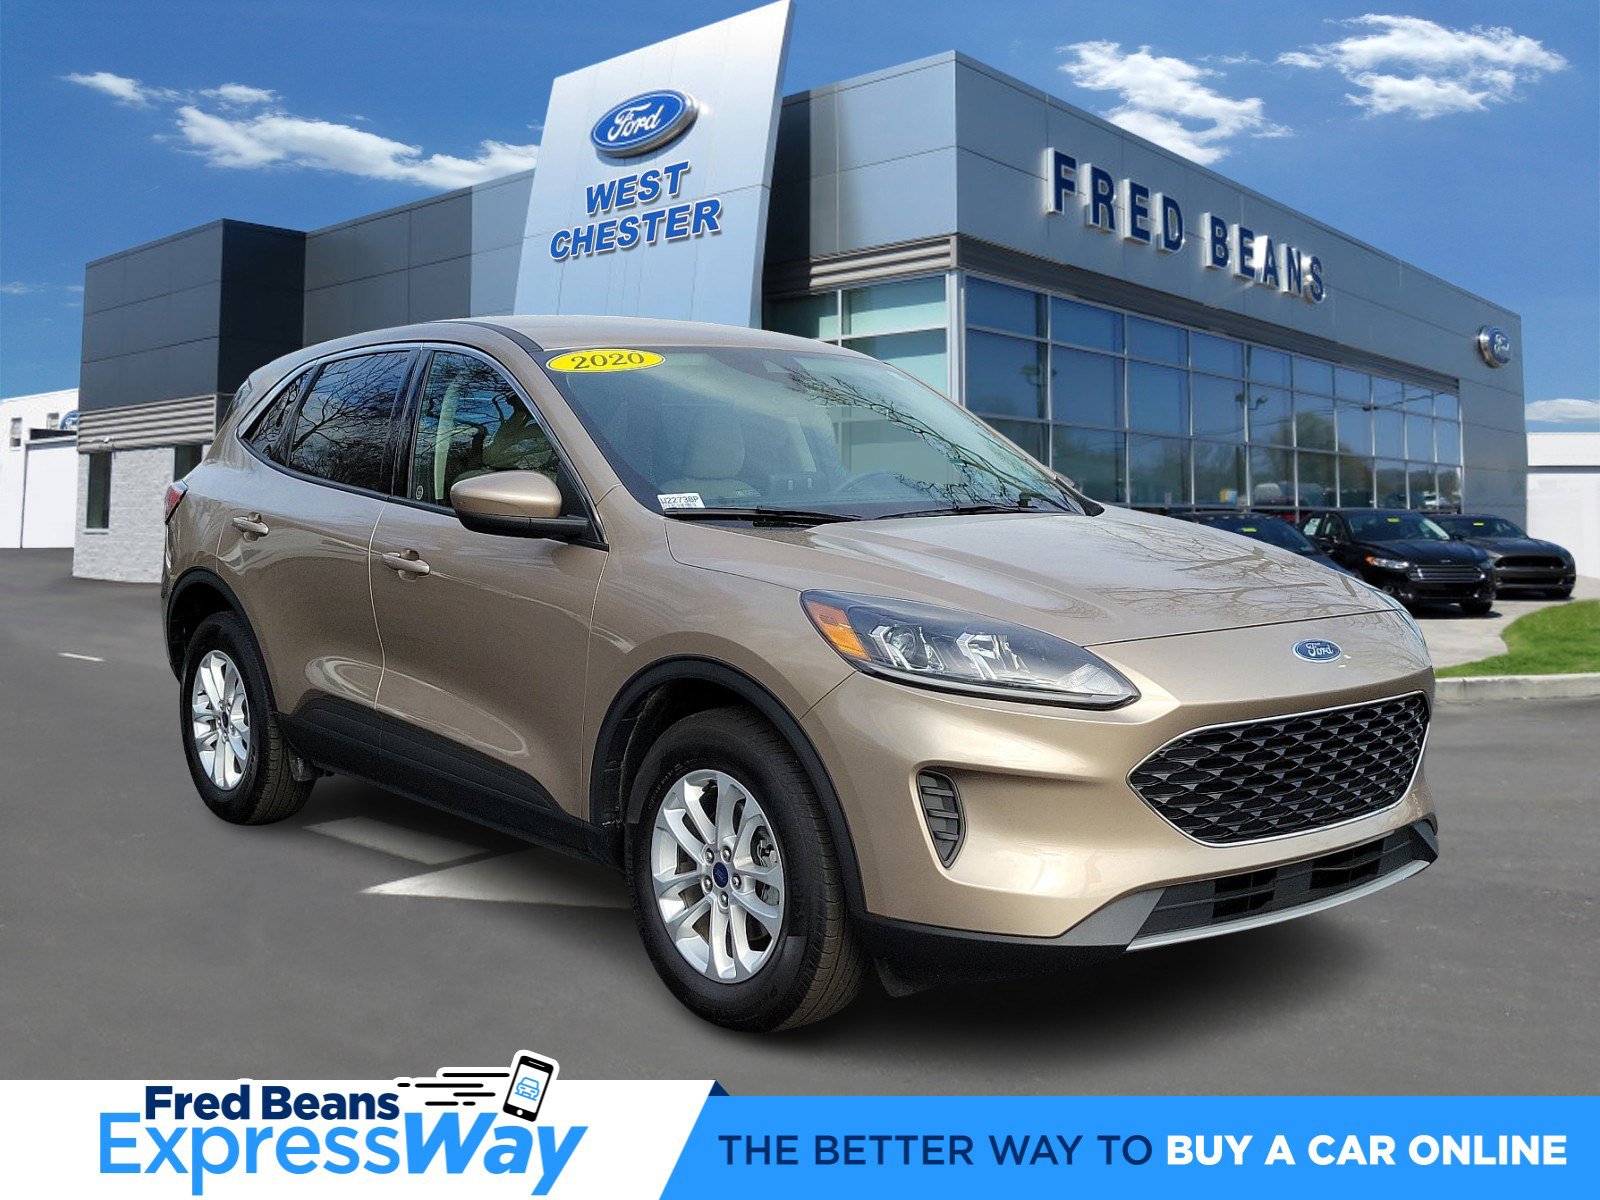 Inventory | Fred Beans Ford of West Chester